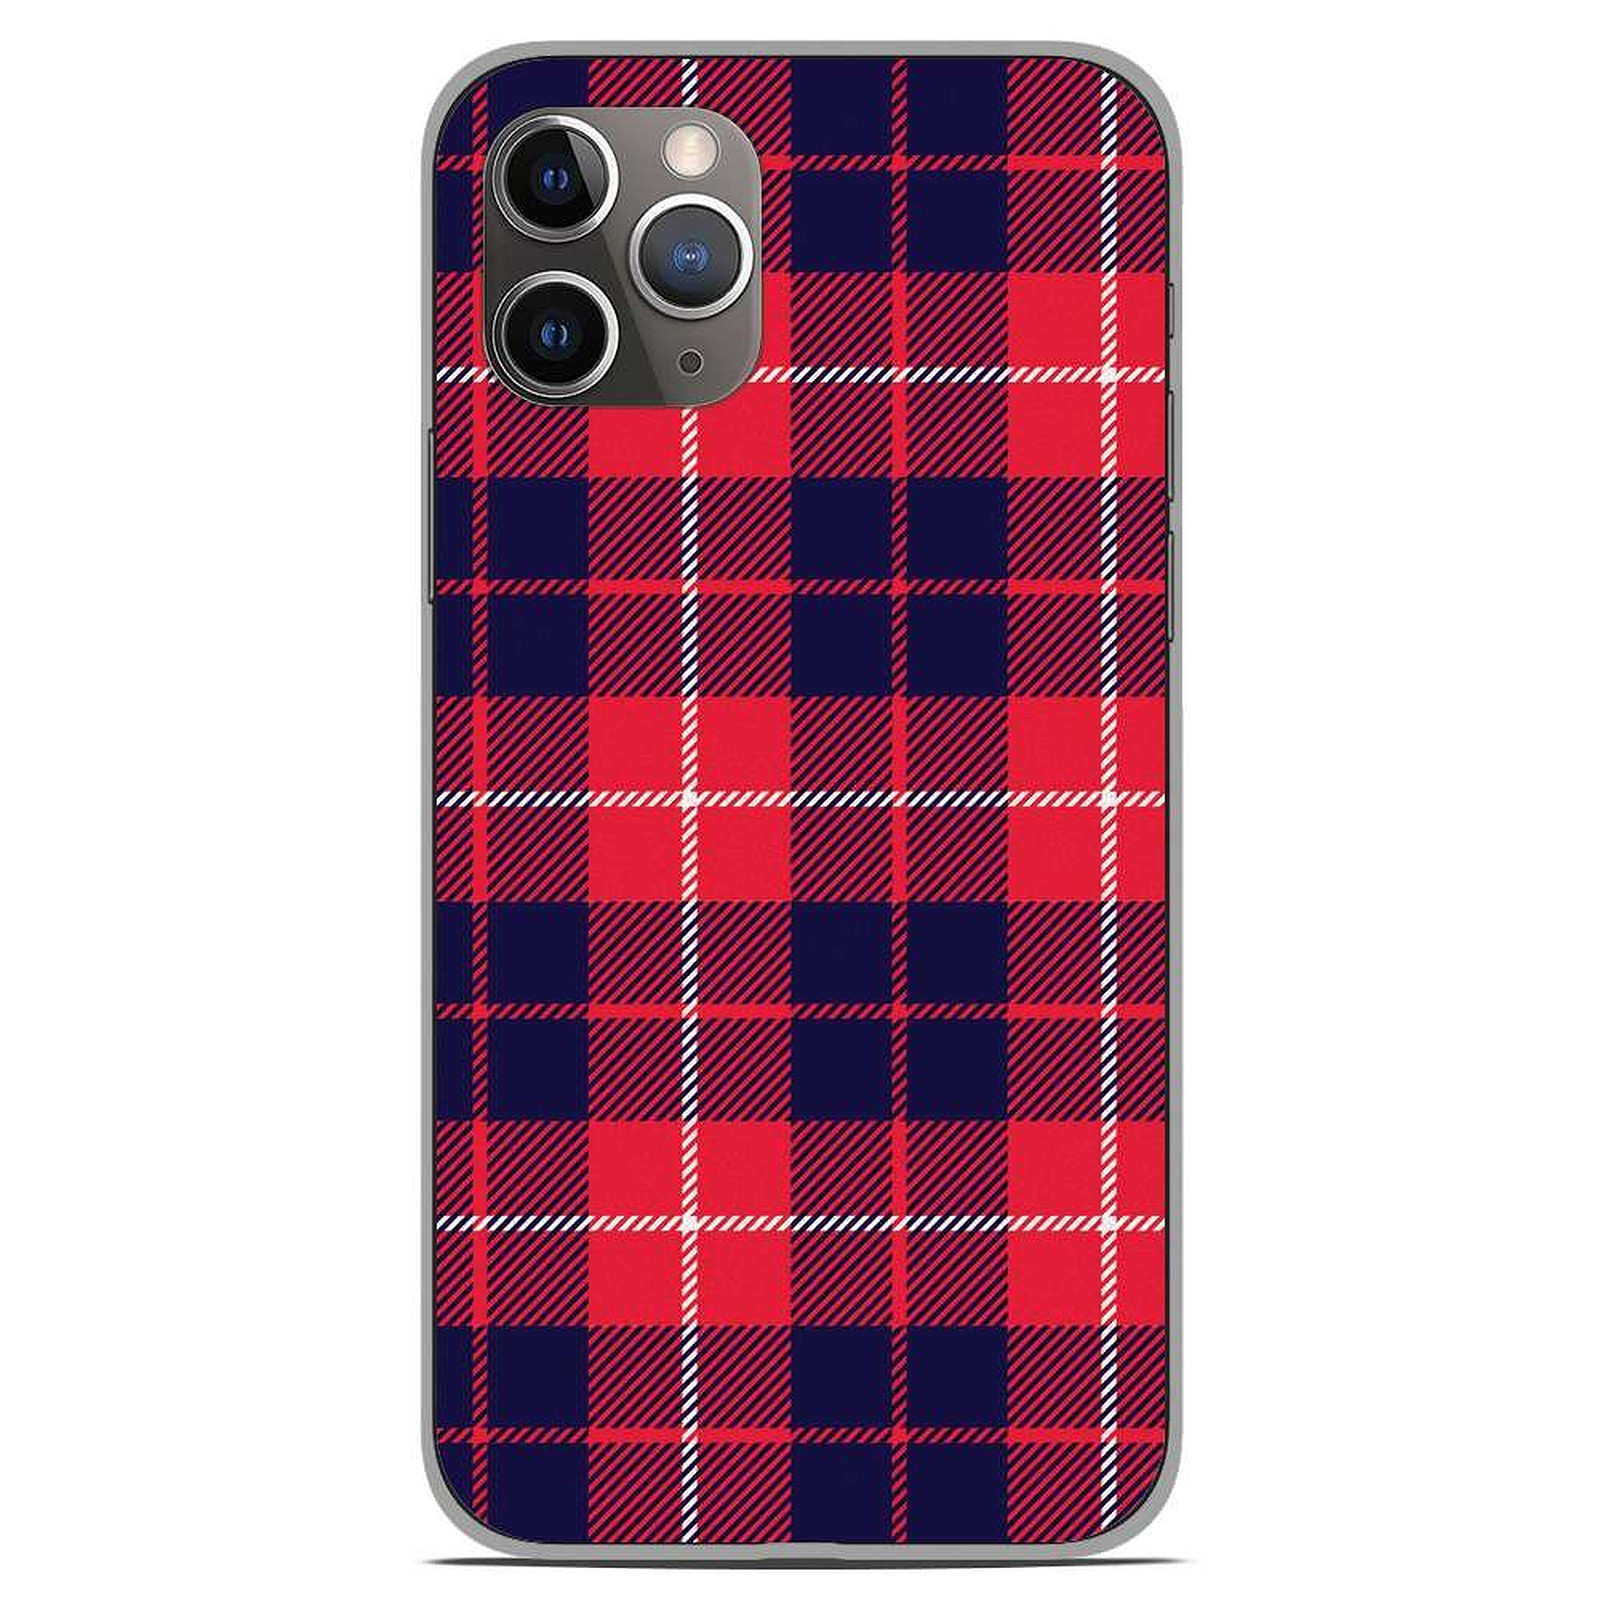 1001 Coques Coque silicone gel Apple iPhone 11 Pro motif Tartan Rouge 2 - Coque telephone 1001Coques